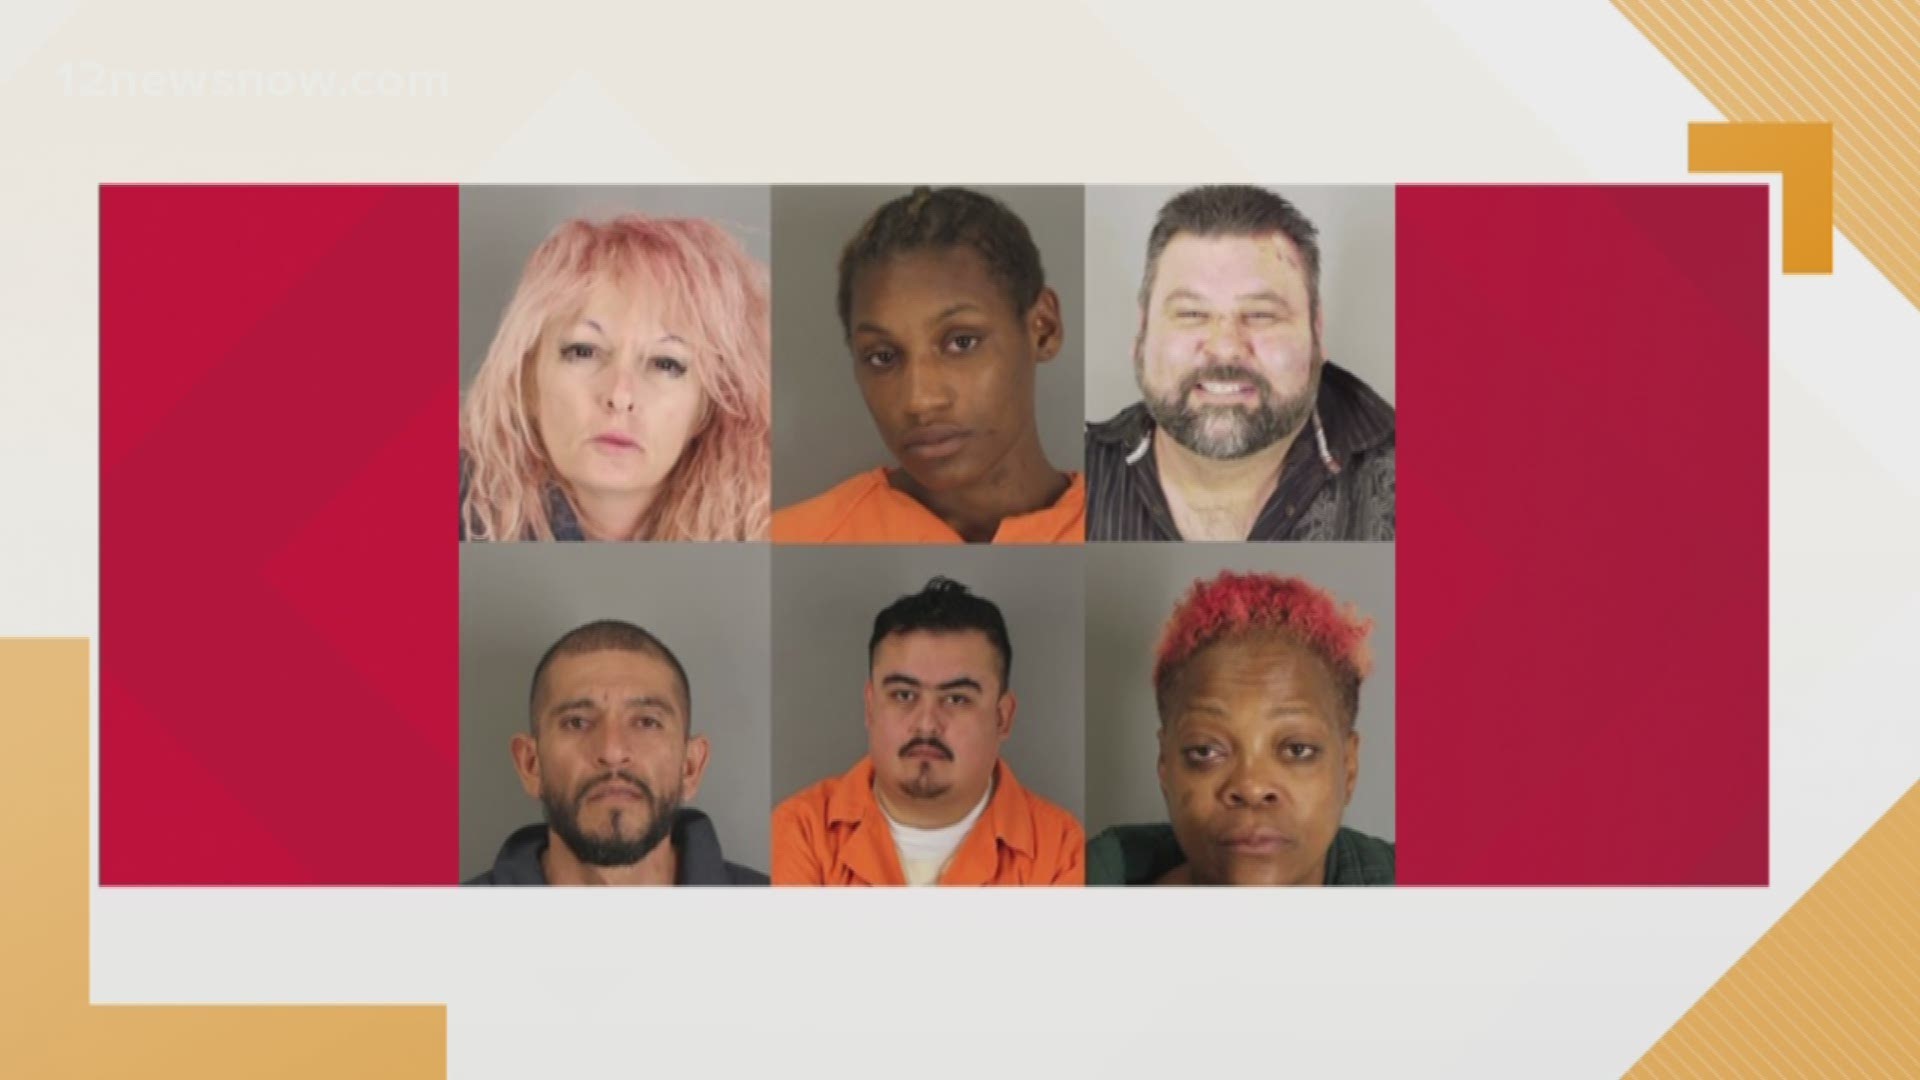 Authorities are looking for fourteen men and women who are wanted for a variety of reasons.